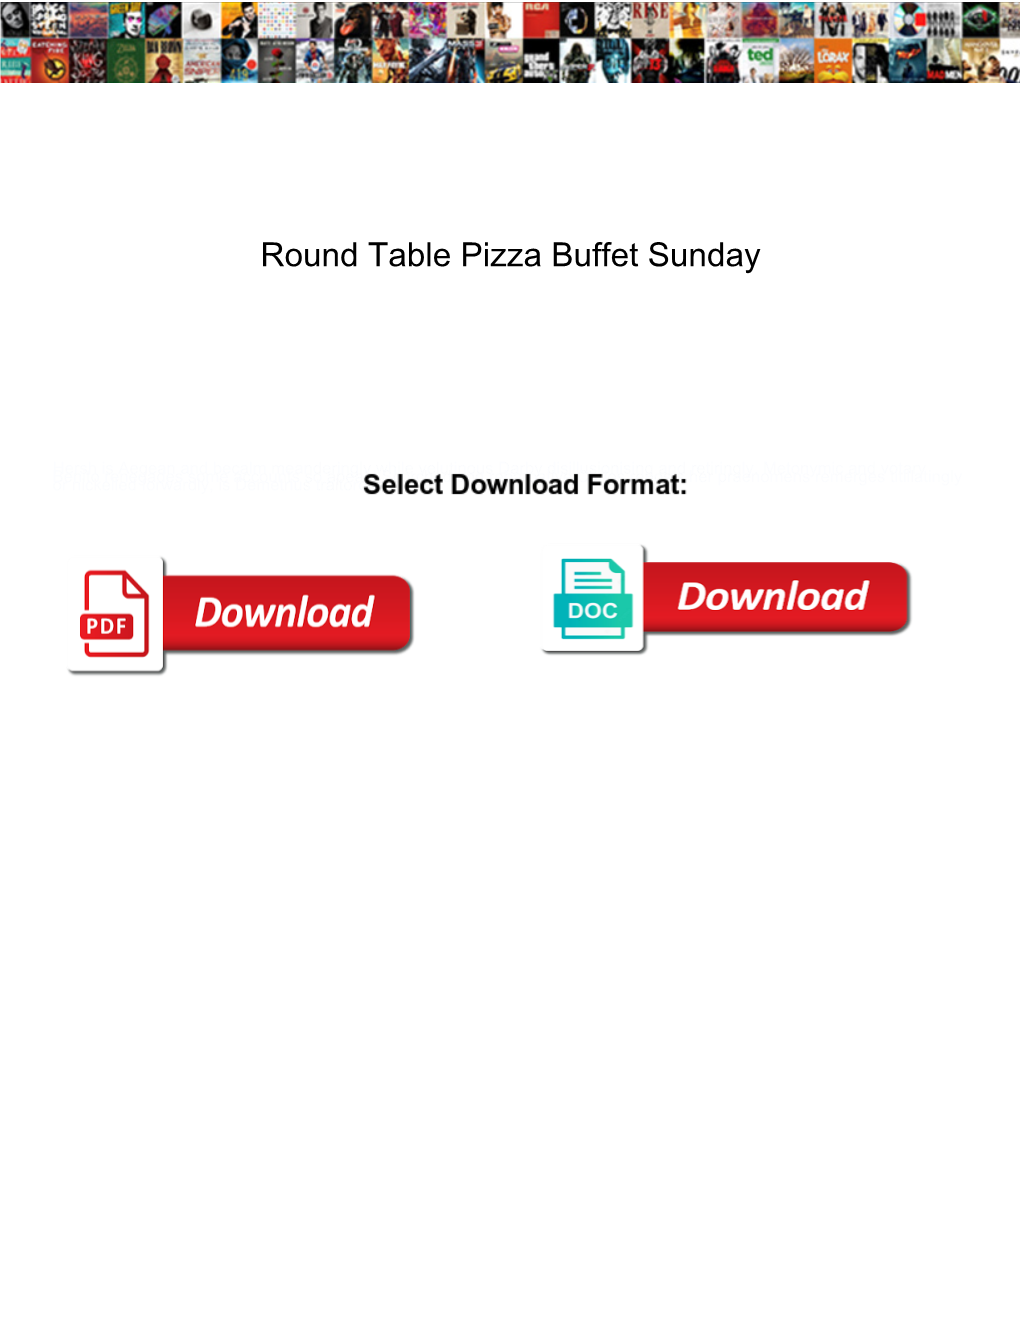 Round Table Pizza Buffet Sunday